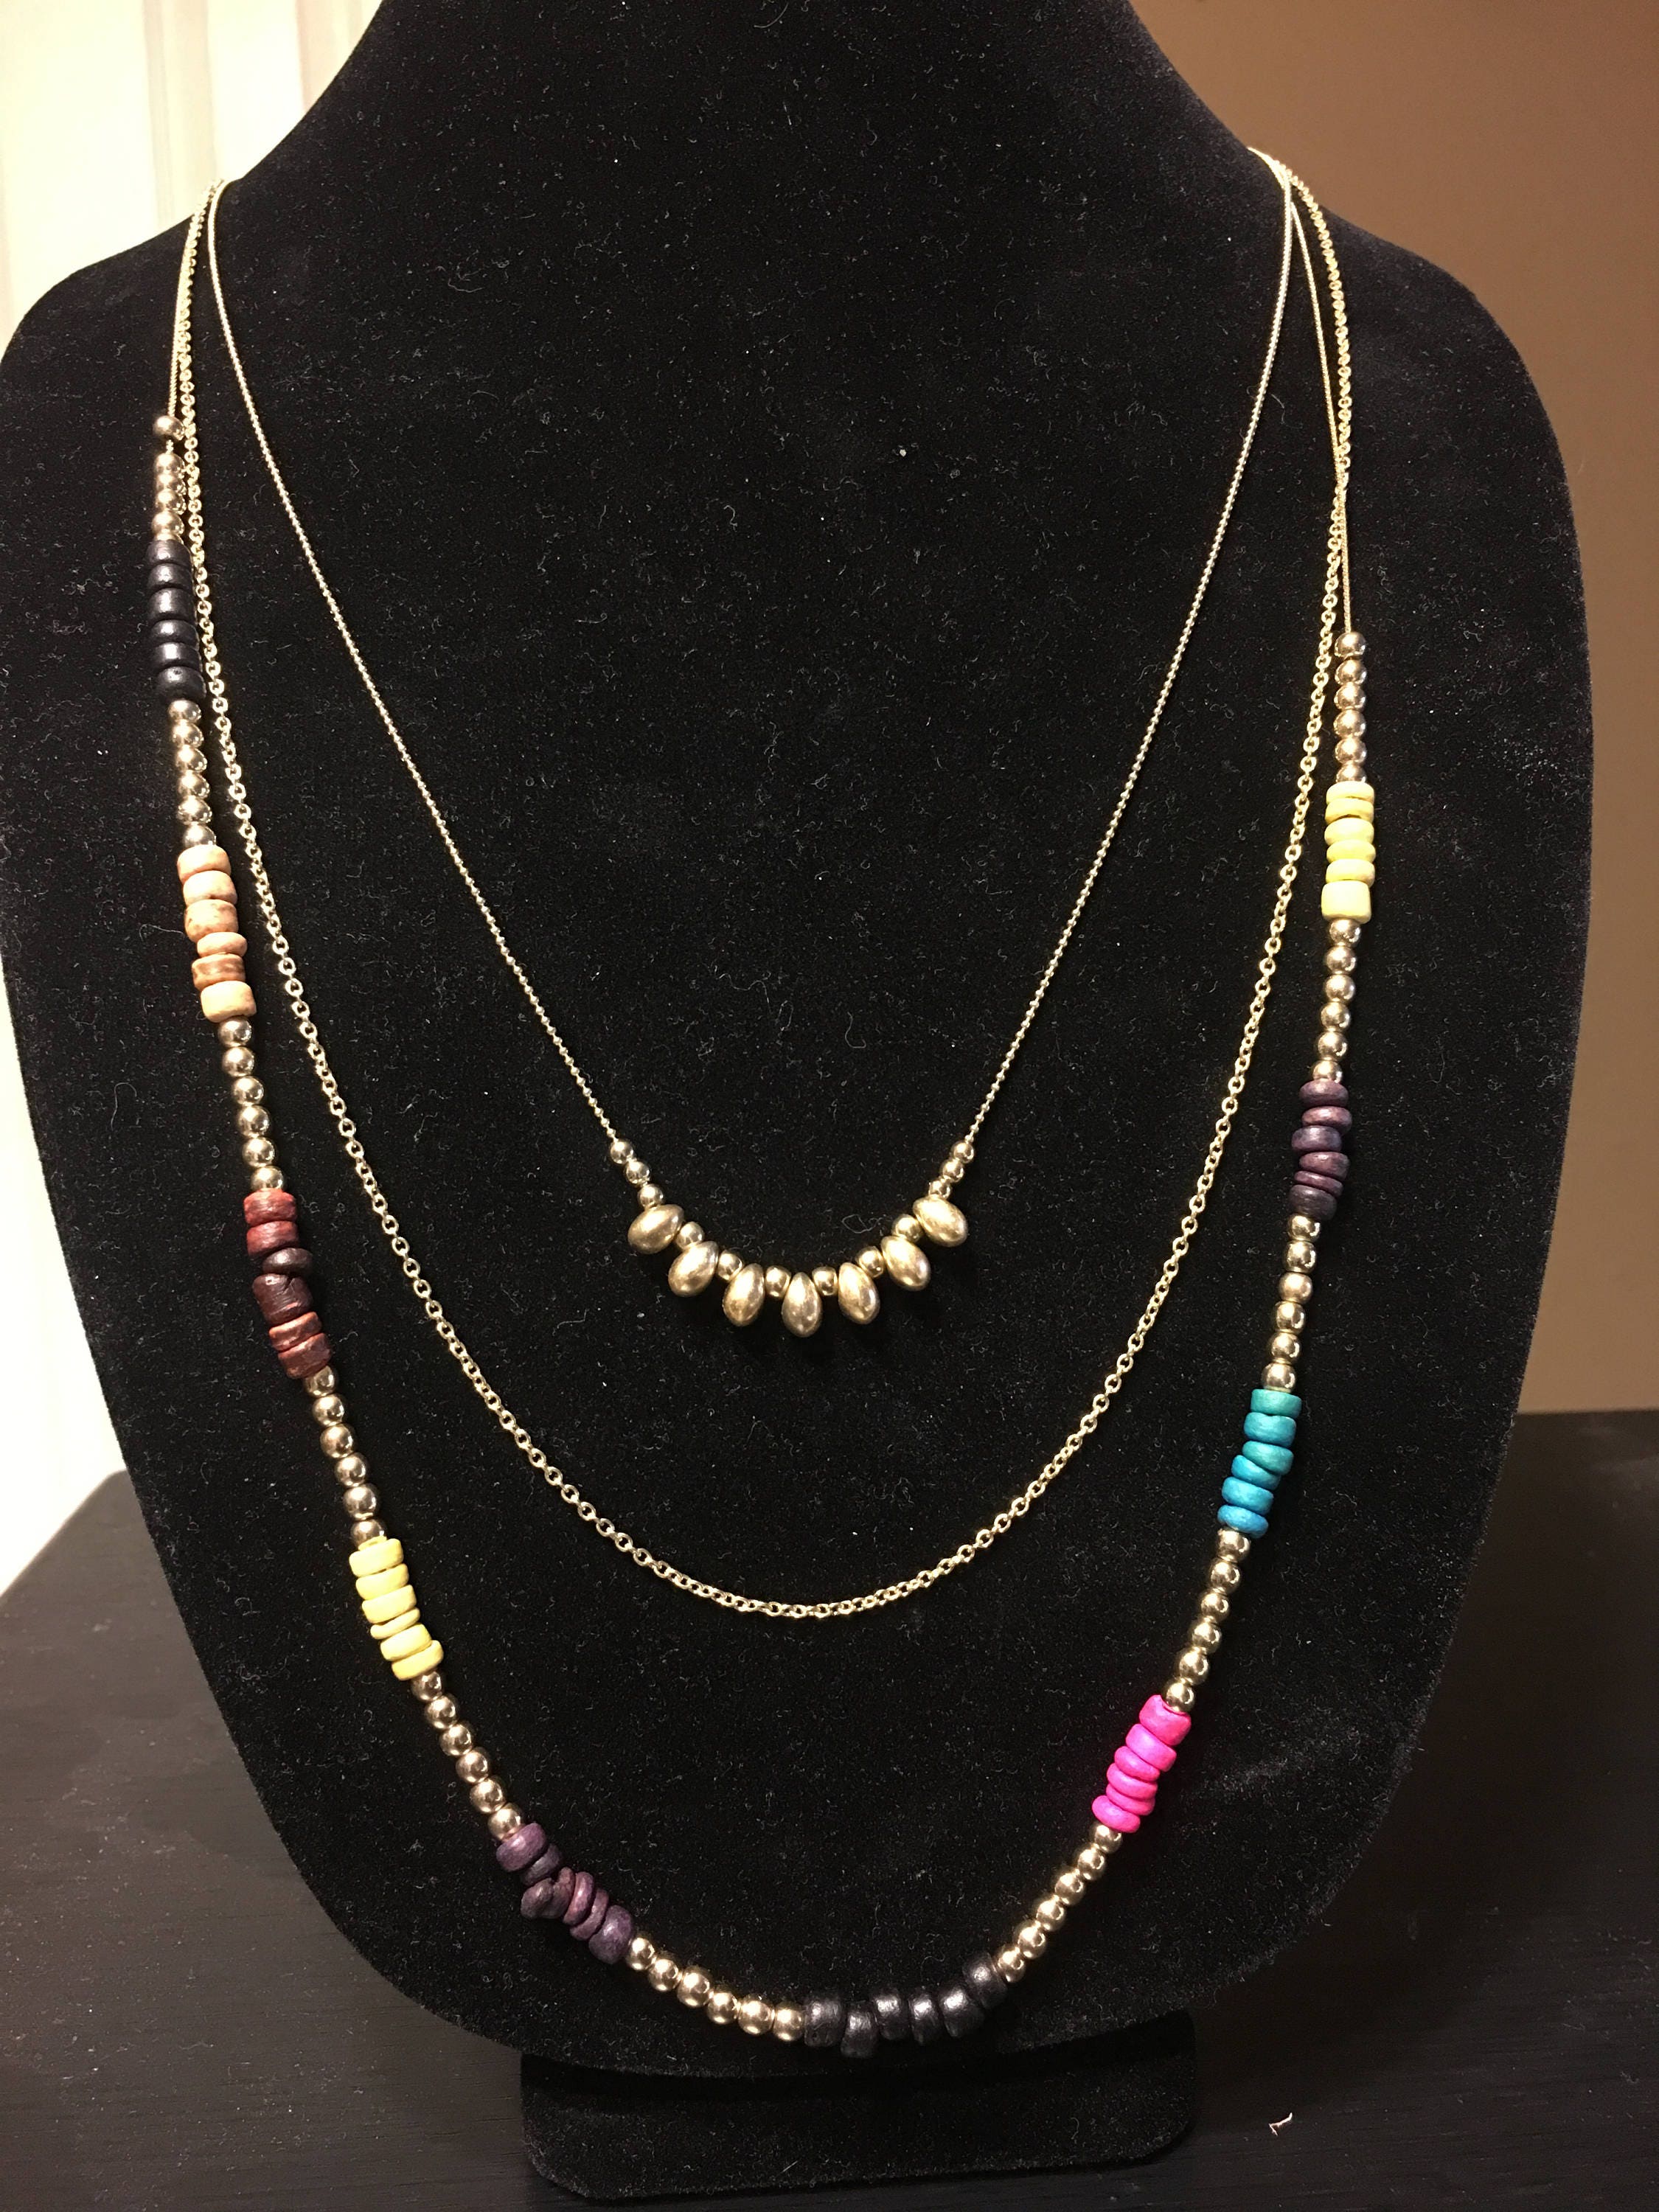 Download Multicolor Layered Beaded Necklace